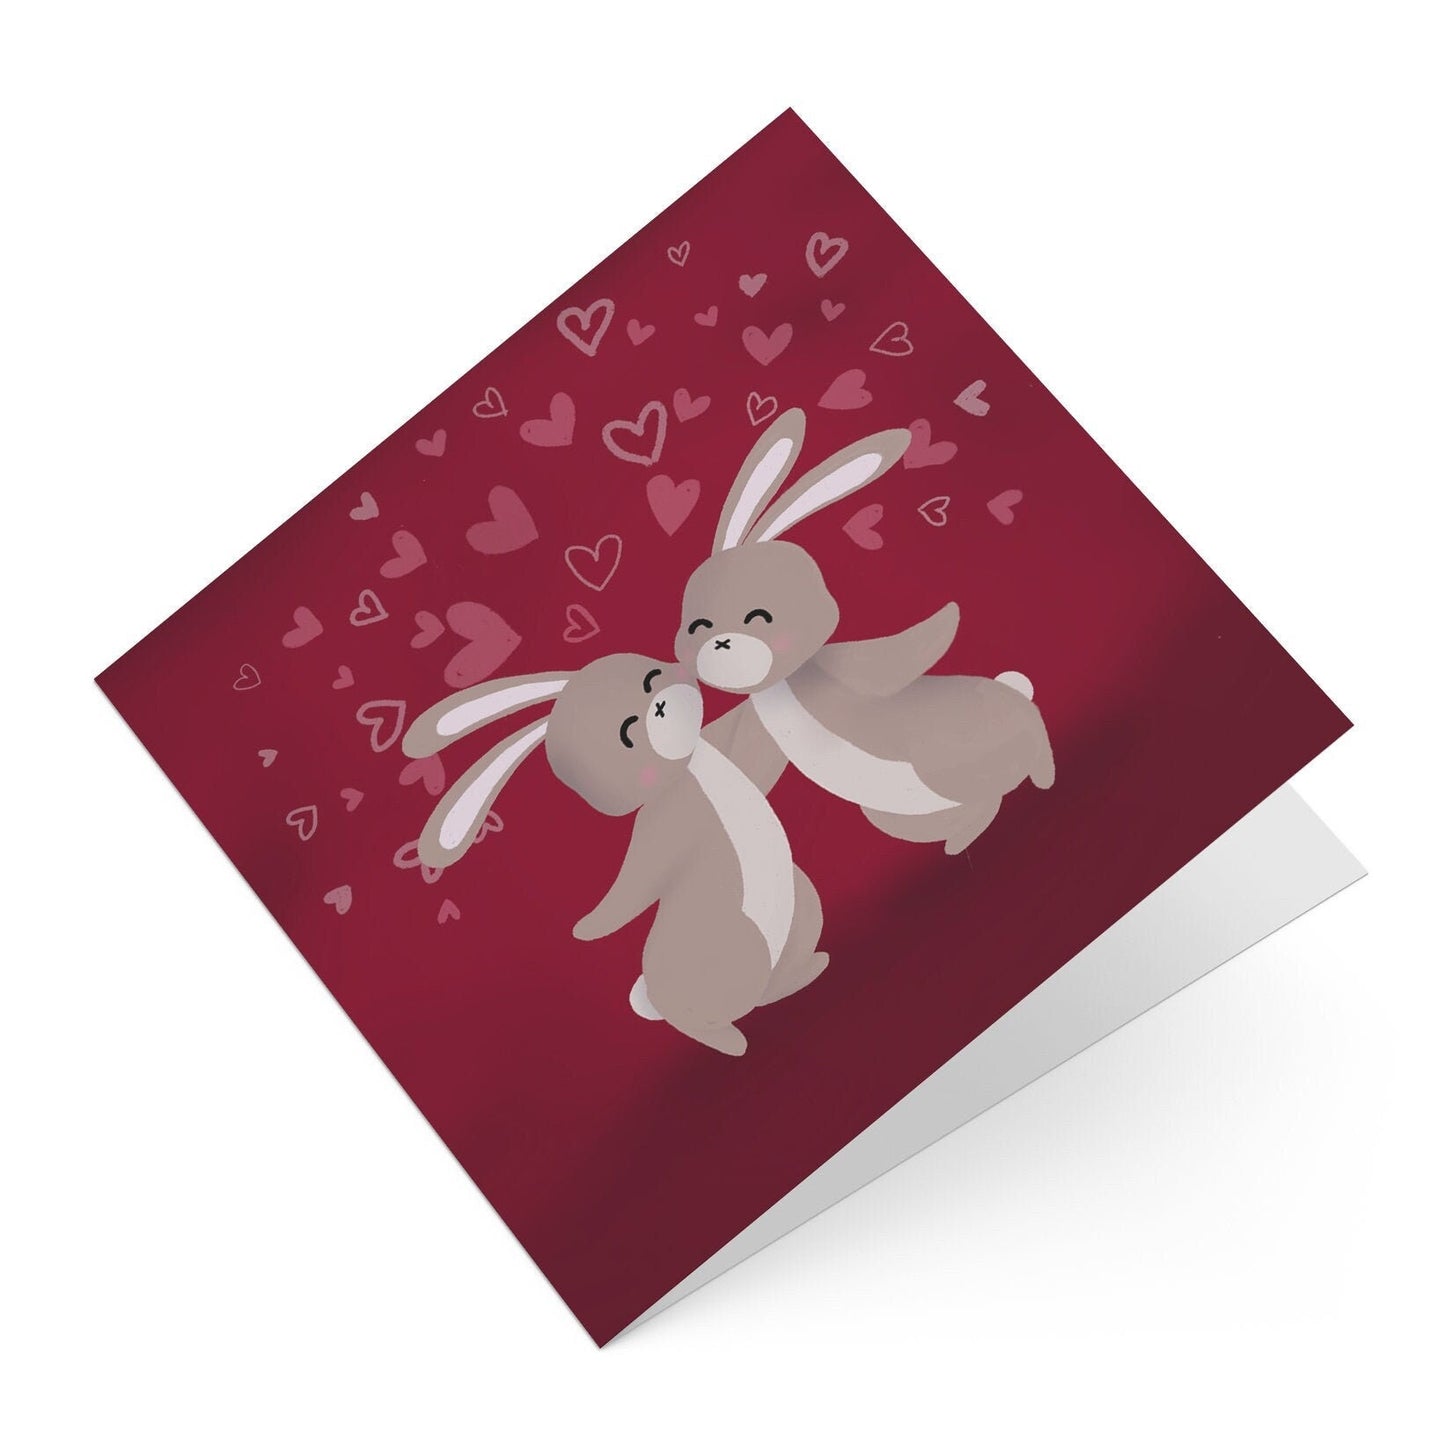 Valentines/Galentines Day Card - Bunny Love - Greeting Card, Greeting Cards/Postcards, Greeting & Note Cards